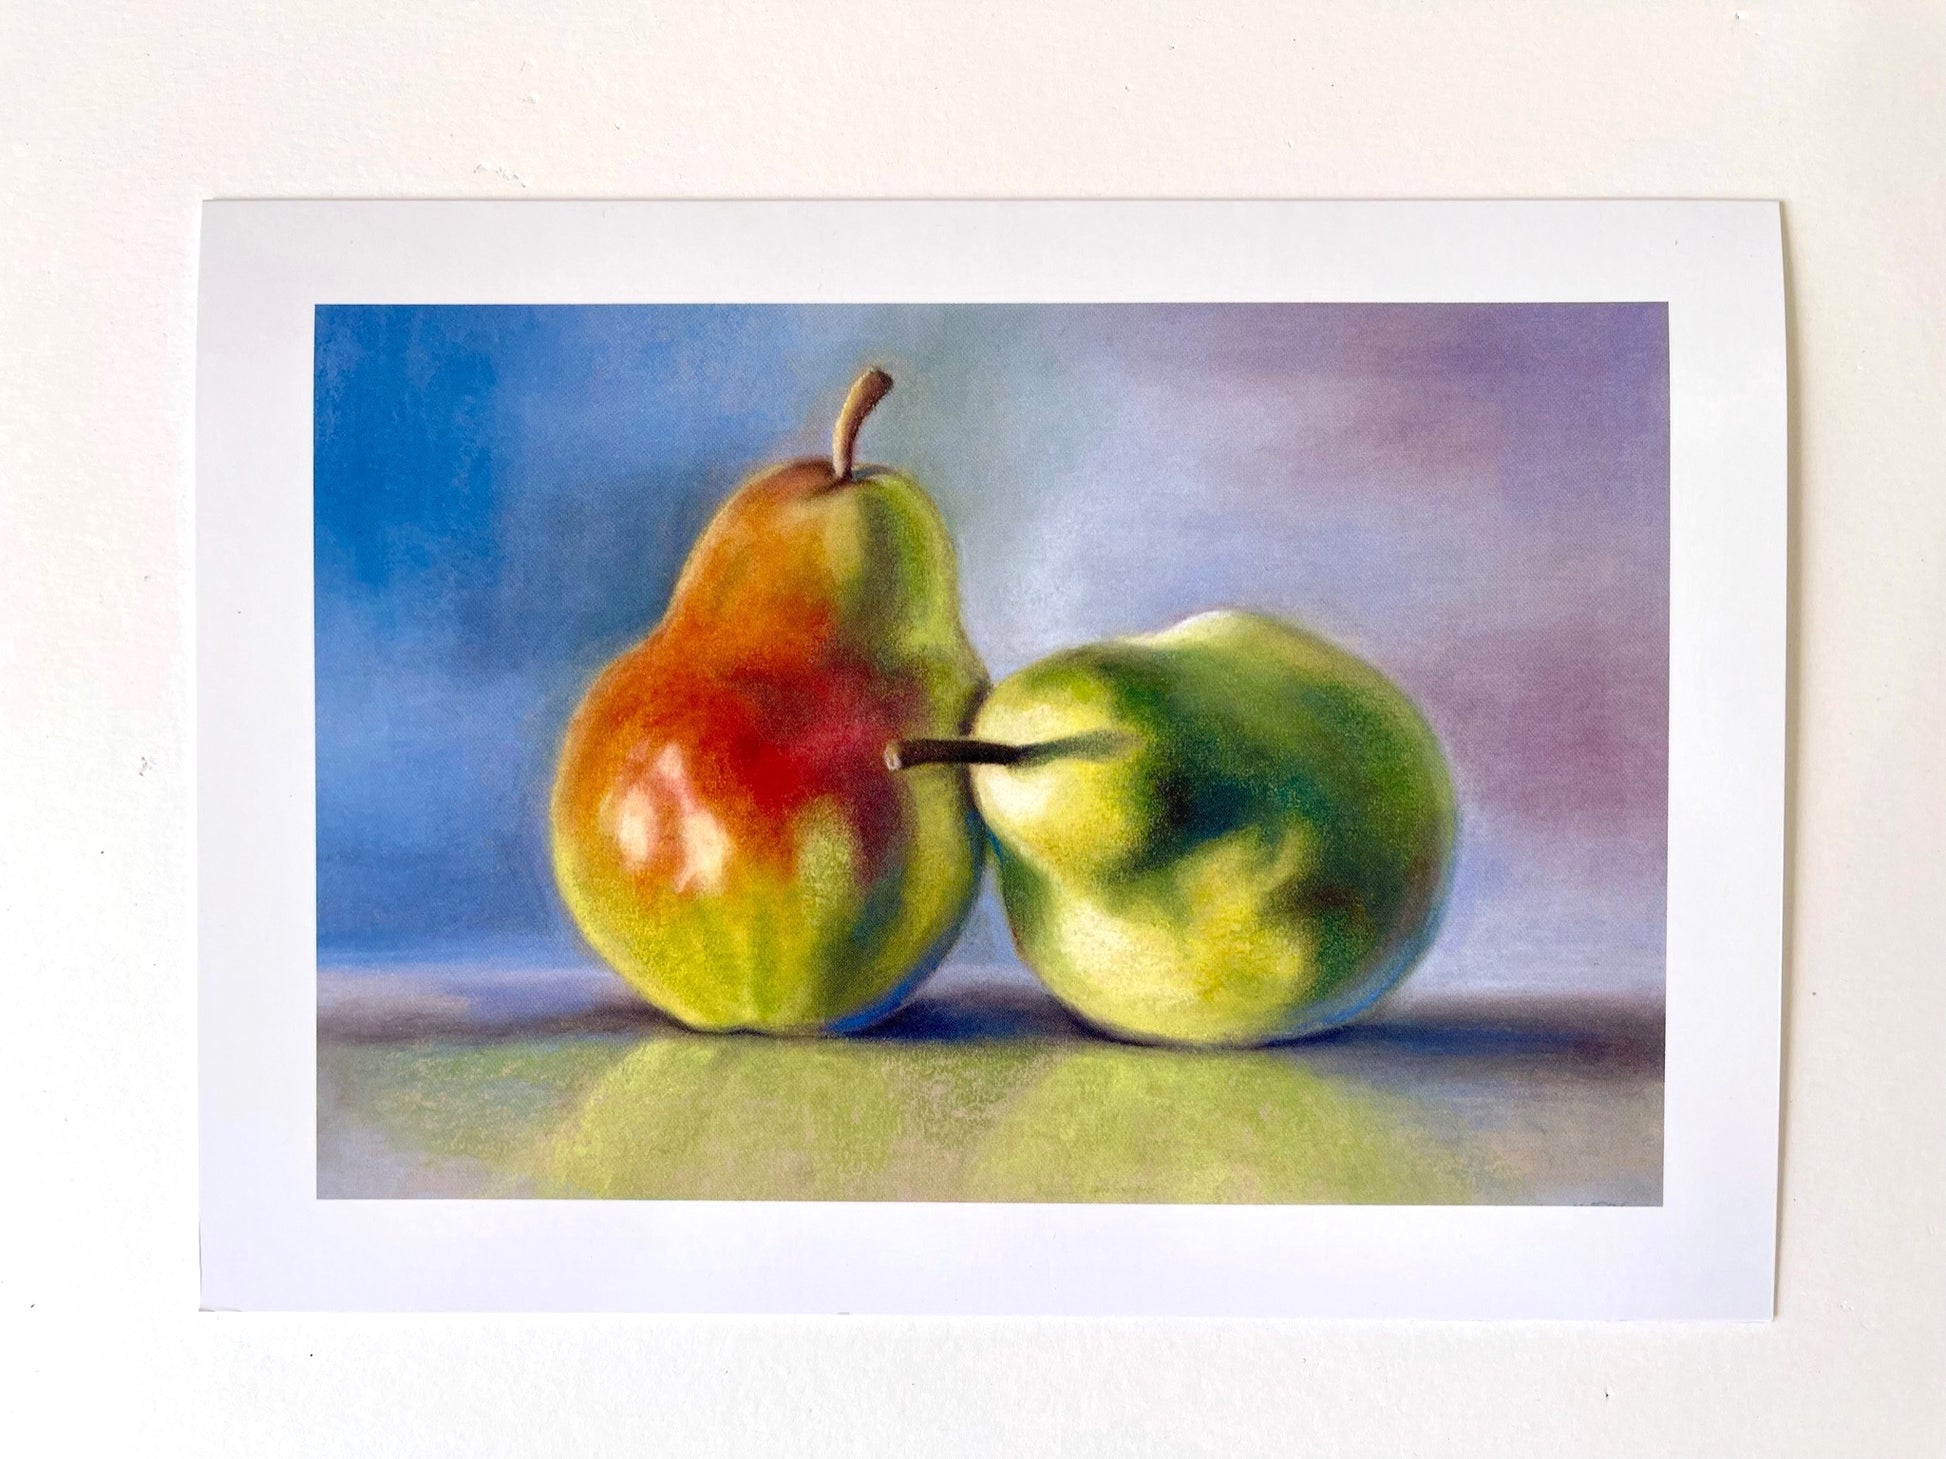 Two vibrantly colourful pears boldly lit with strong shadows, sitting on a polished surface with a reflection of them visible. The pears are bright reds and greens, the background is muted blues and purples. A pastel painting in a traditional style.